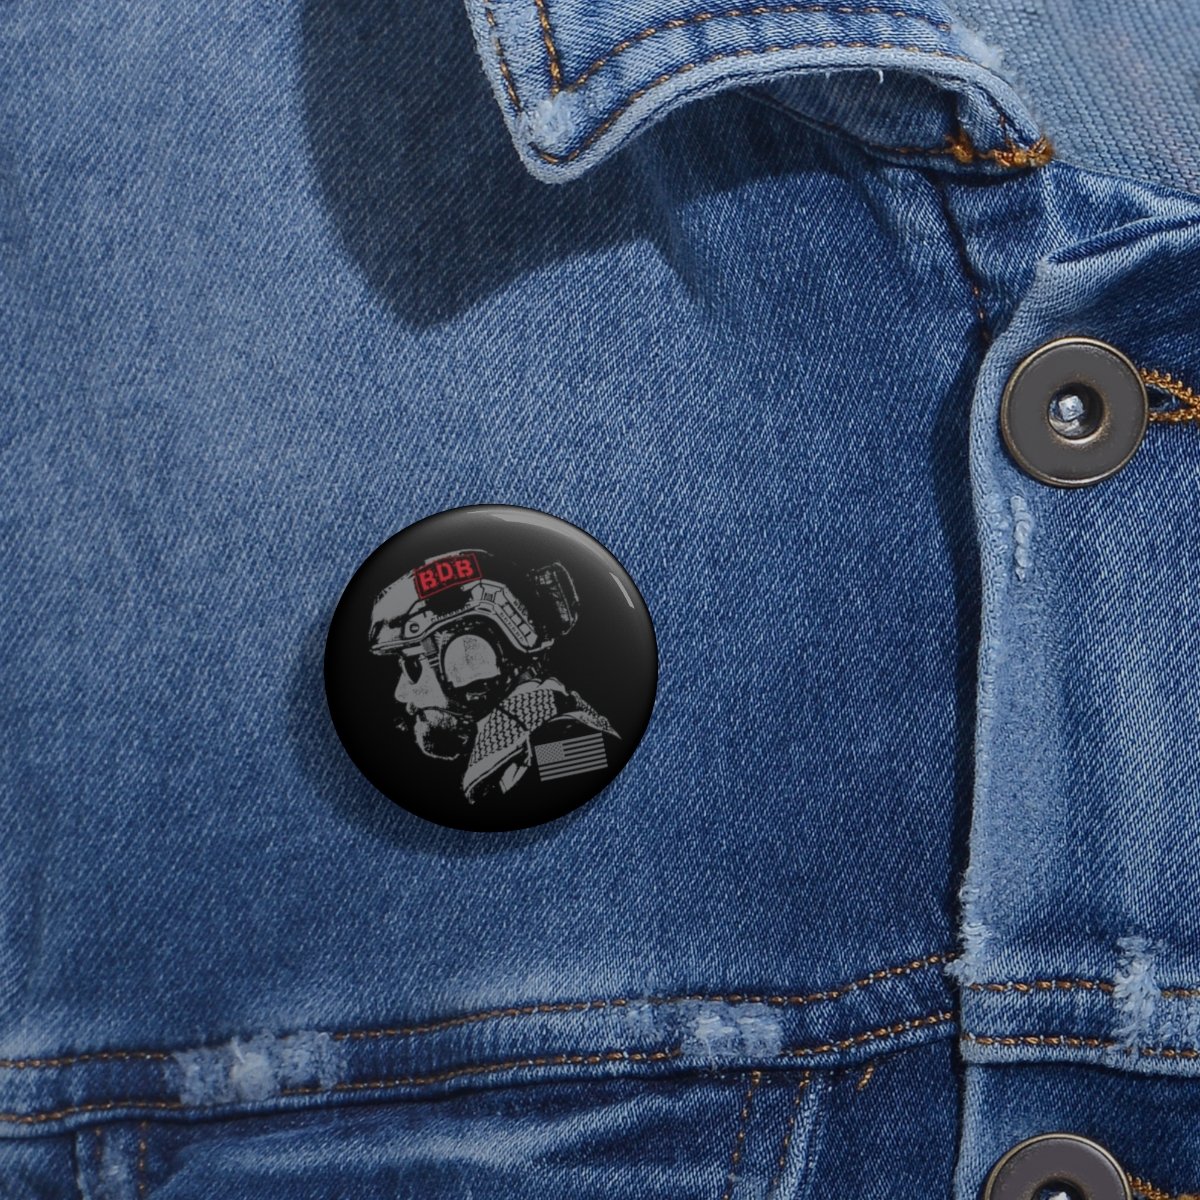 Bringing Down Broadway – Operator Pin Buttons